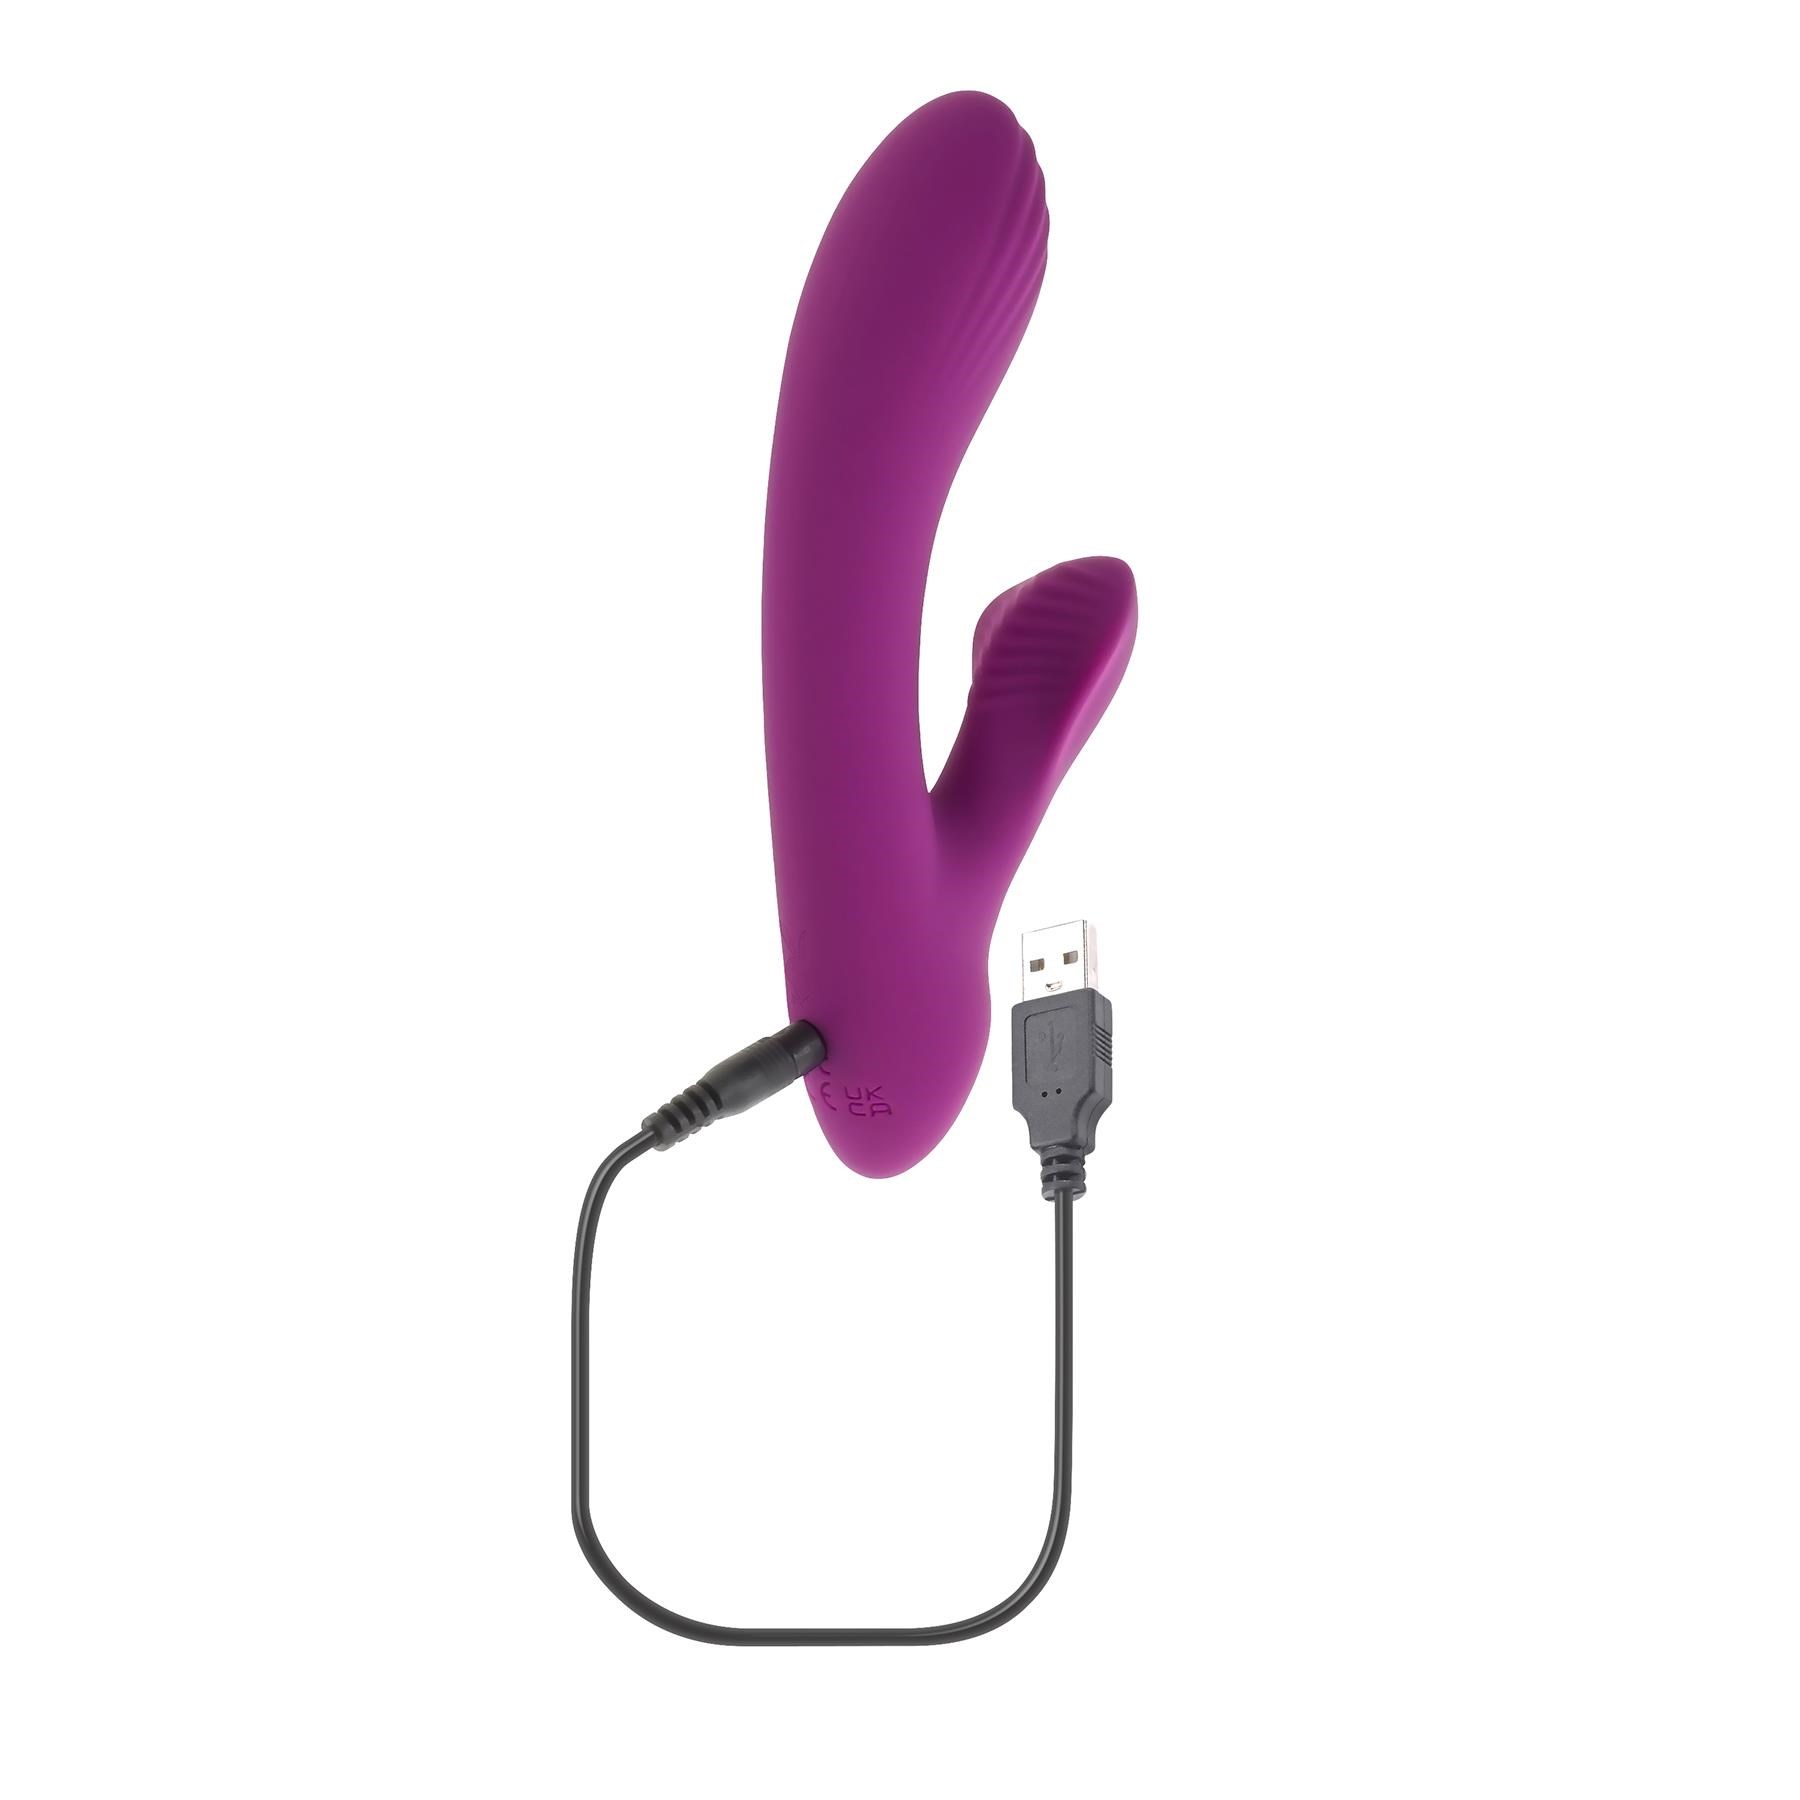 Playboy Pleasure Bitty Bunny Vibrator - Product Shot With Charging Cable